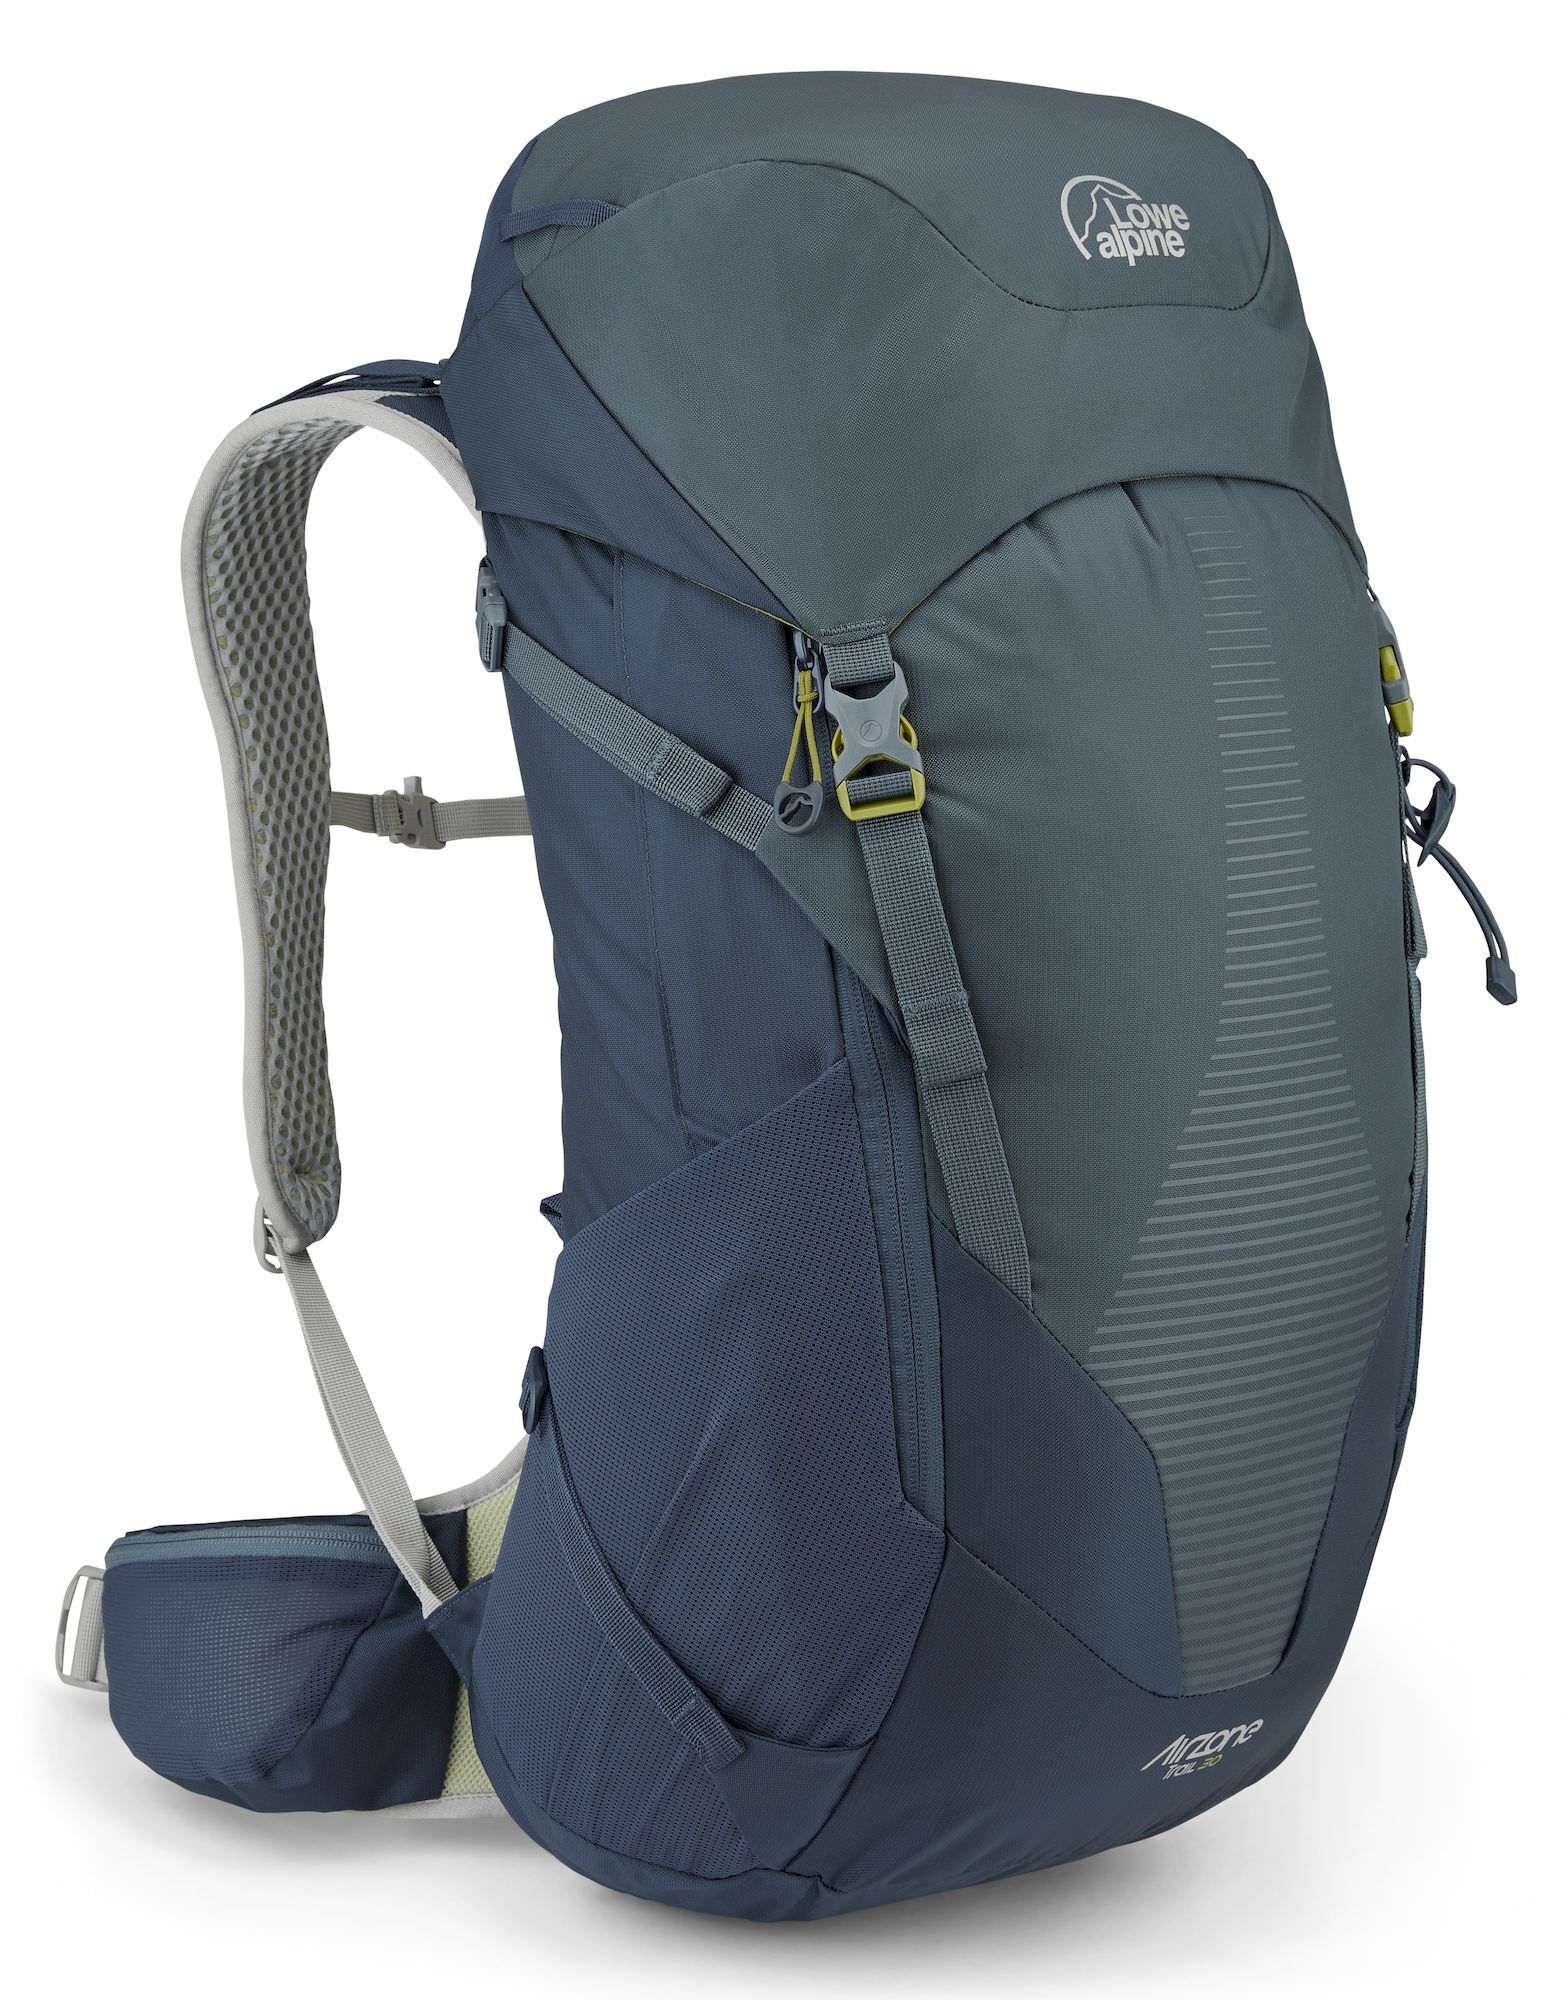 Lowe Alpine - AirZone Trail 30 - Hiking backpack - Men's